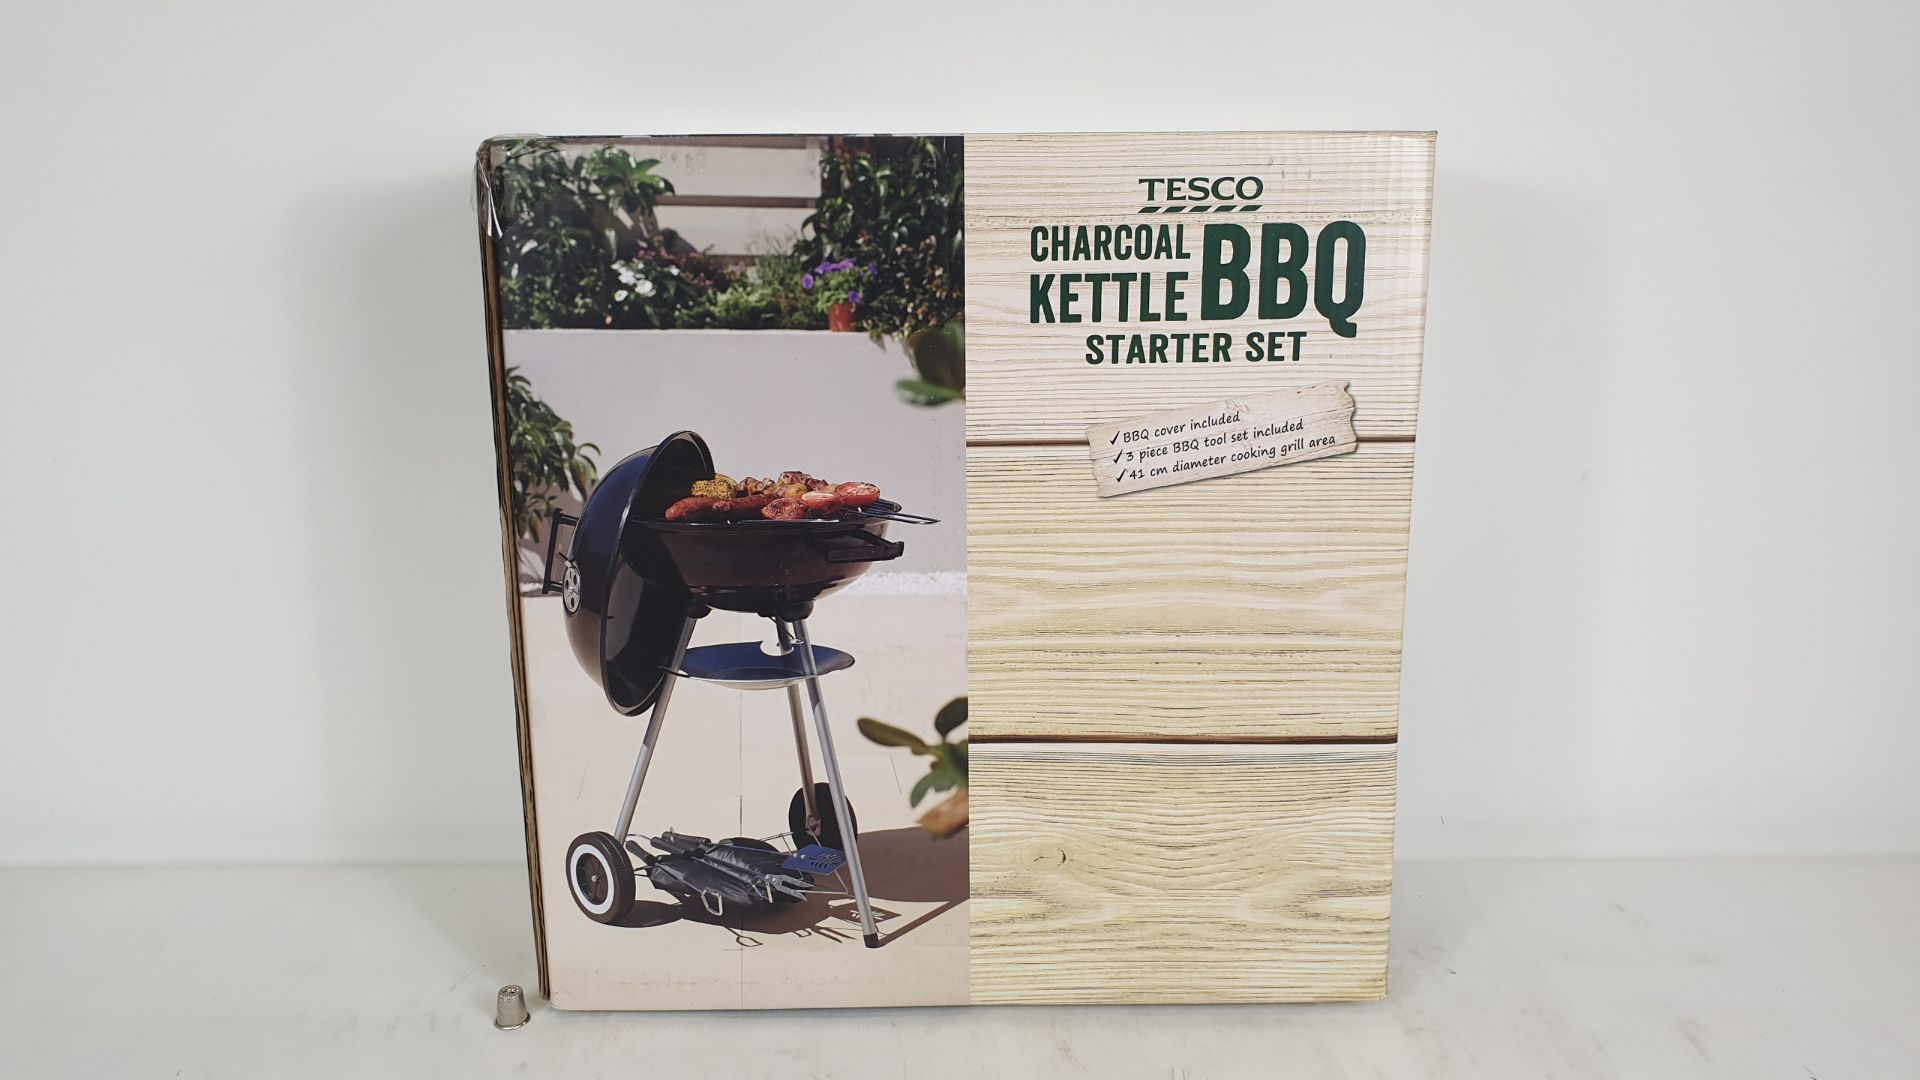 8 X TESCO CHARCOAL KETTLE BARBEQUE STARTER SETS ( INCLUDES BBQ, GRILL AREA 41CM DIAM, 3PC TOOLS